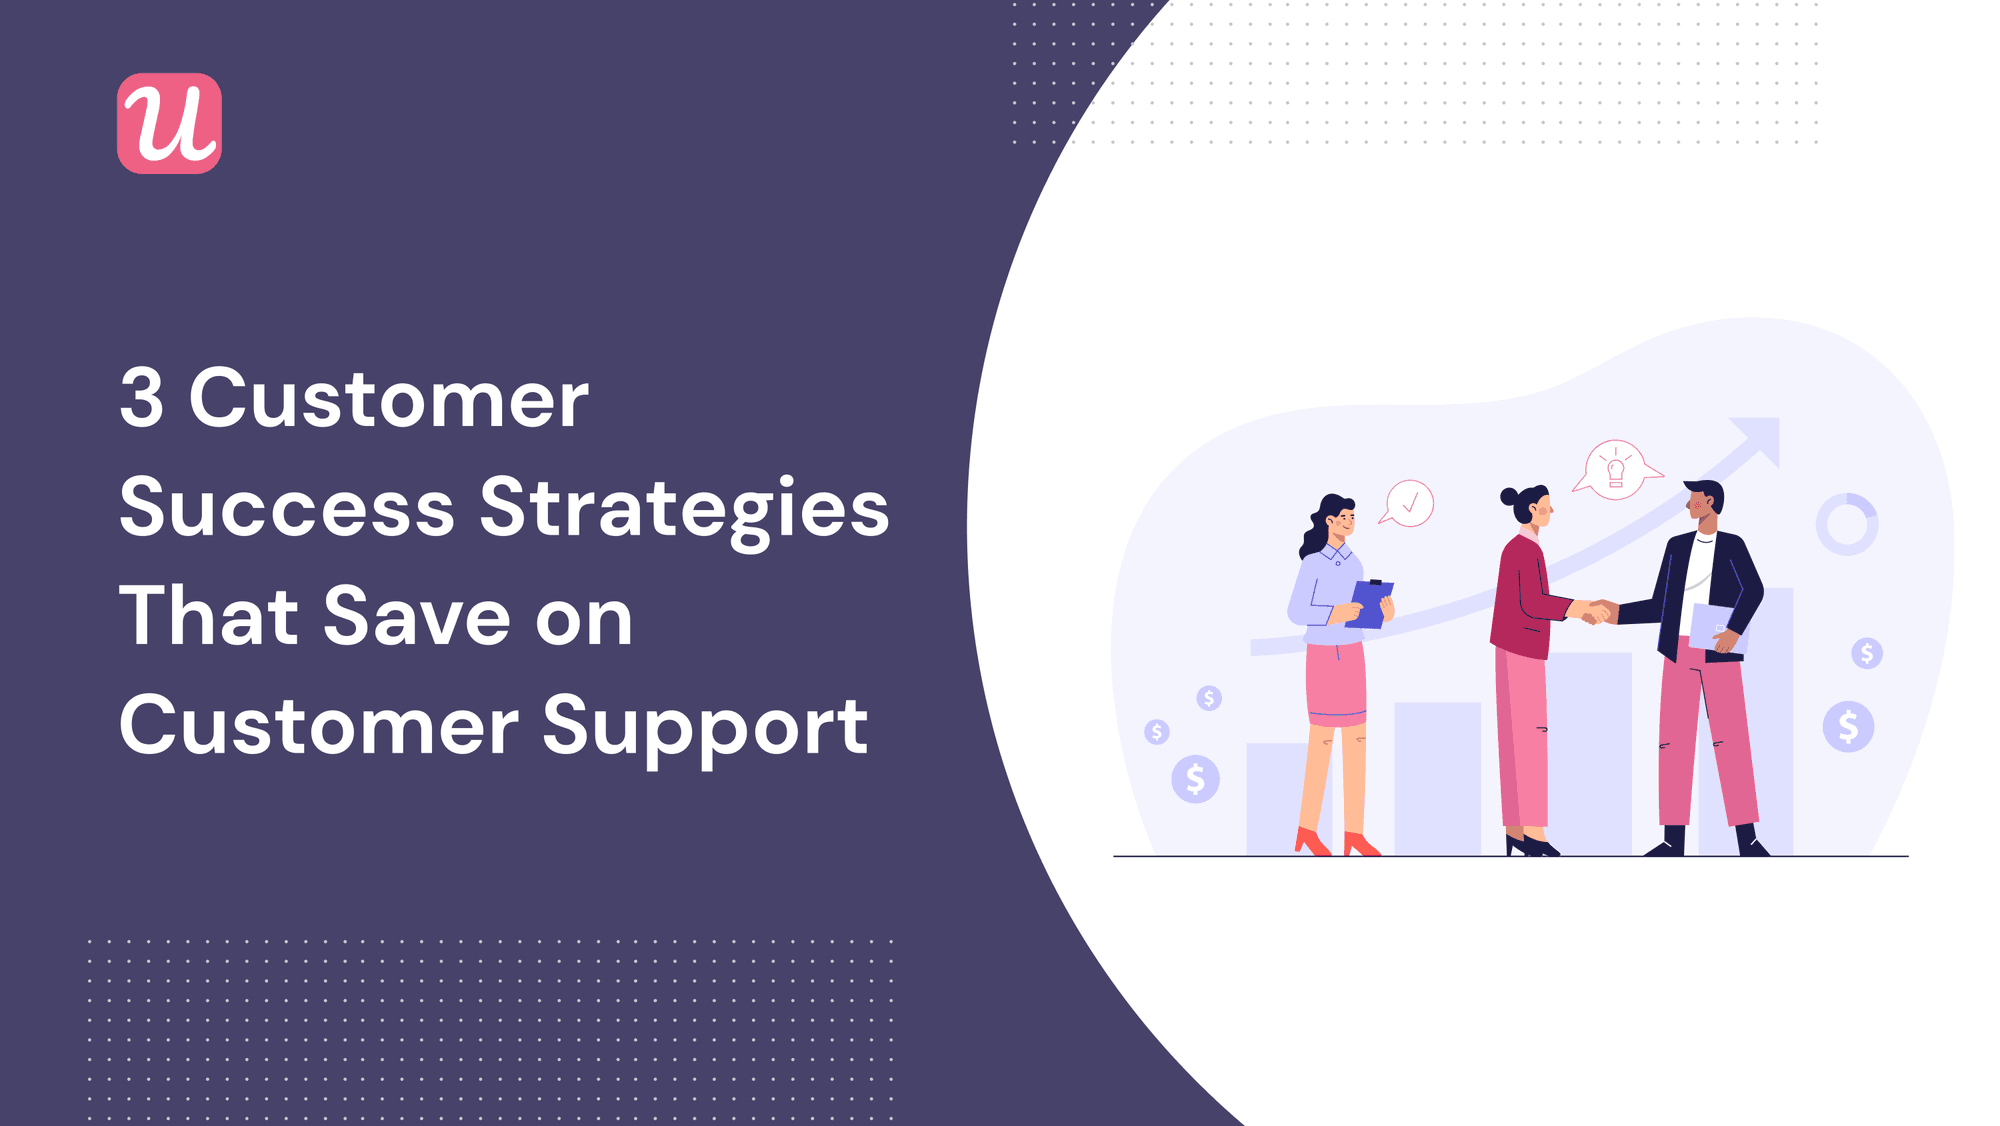 3 Customer Success Strategies That Save on Customer Support